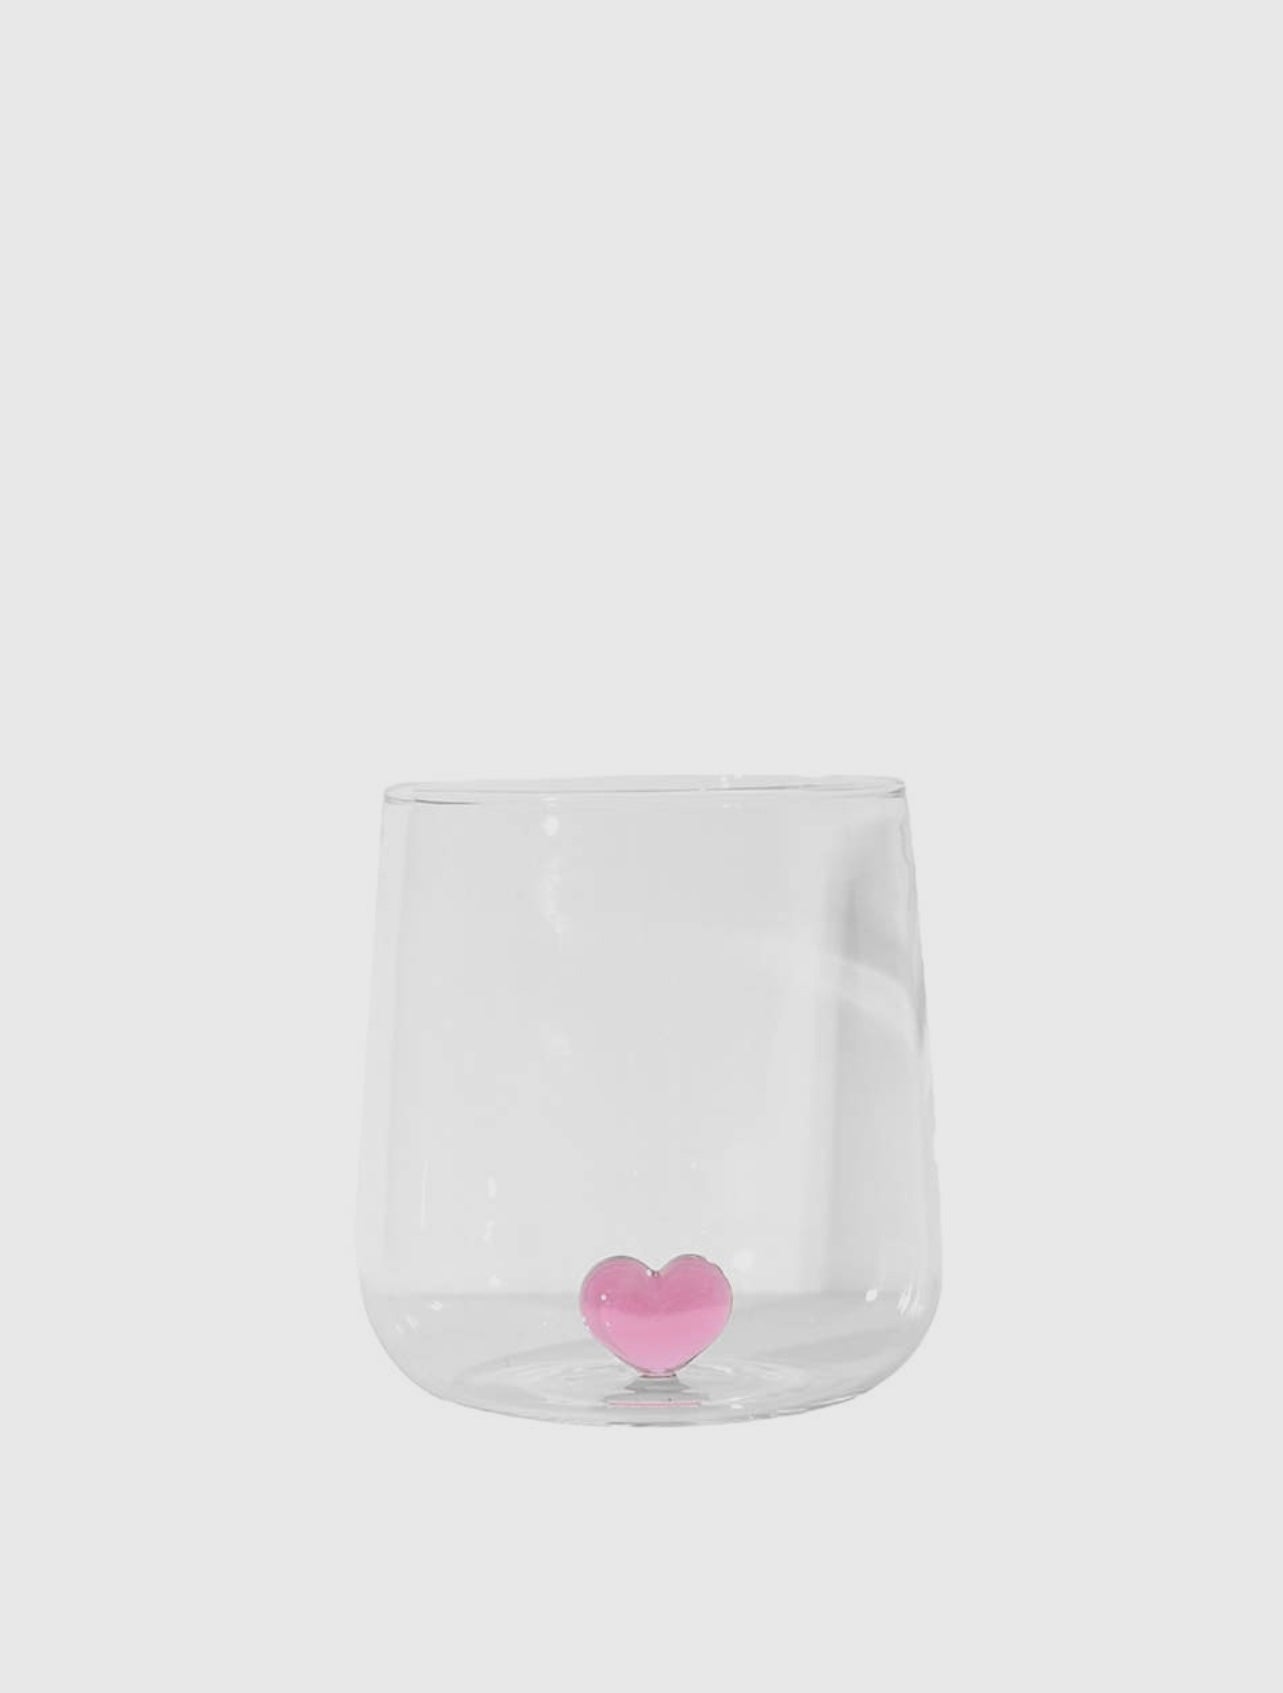 L’Amour glass with pink love heart